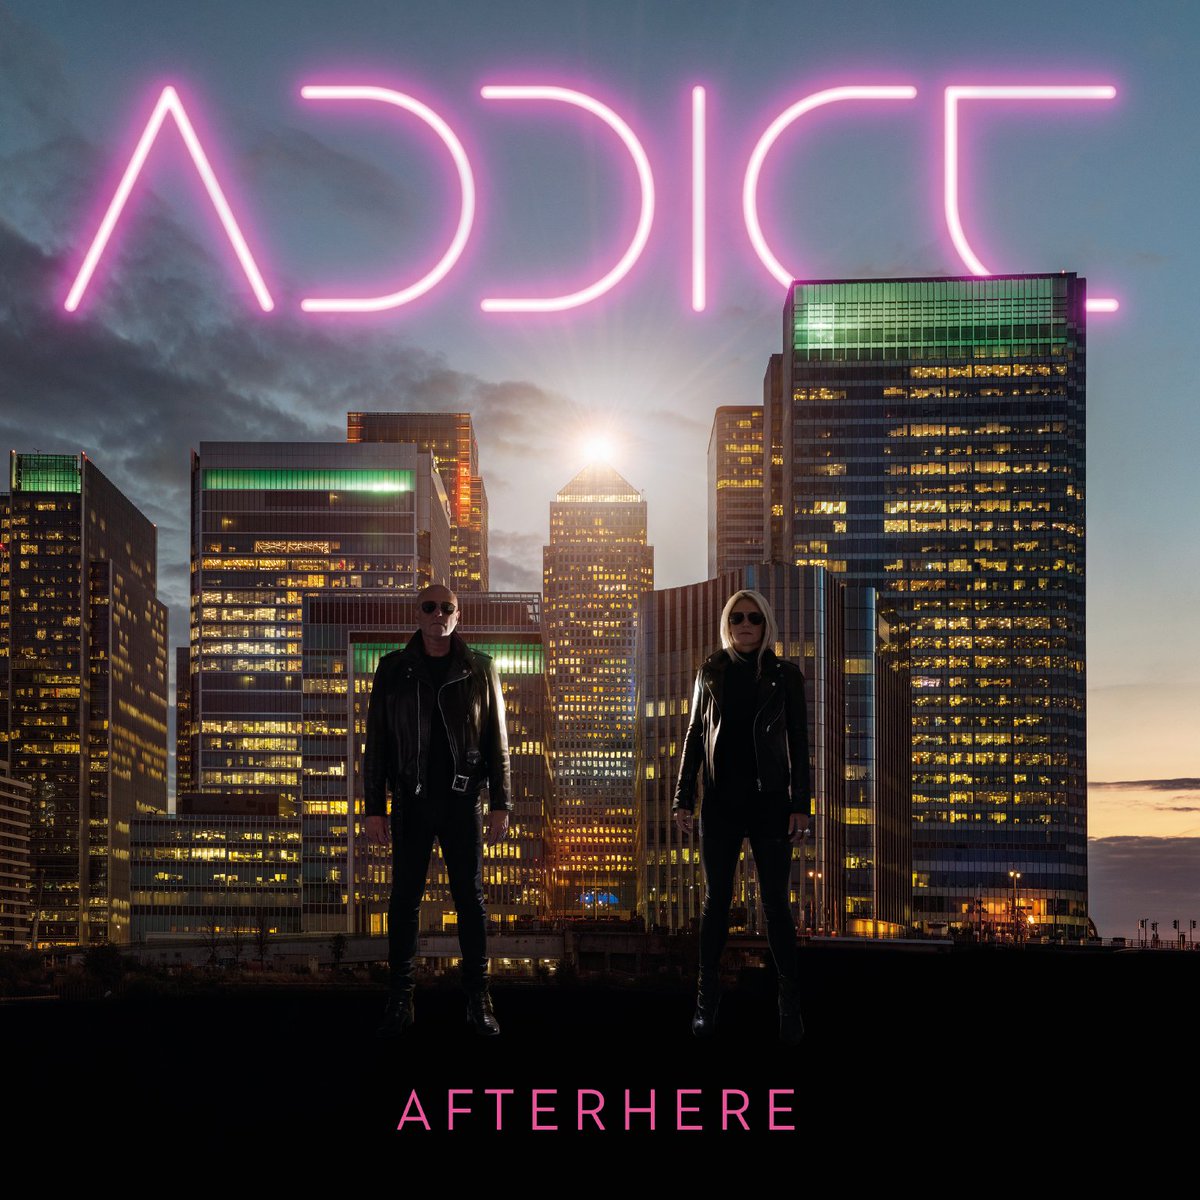 3 weeks to go until the debut show from @WeAreAfterhere @229thevenue London. @mrgregory & @berenicescott showcasing their amazing new album 'Addict' alongside some @heaven17bef & @DavidBowieReal favourites! A special night, for sure. Tix from: 229.london/event/afterher…